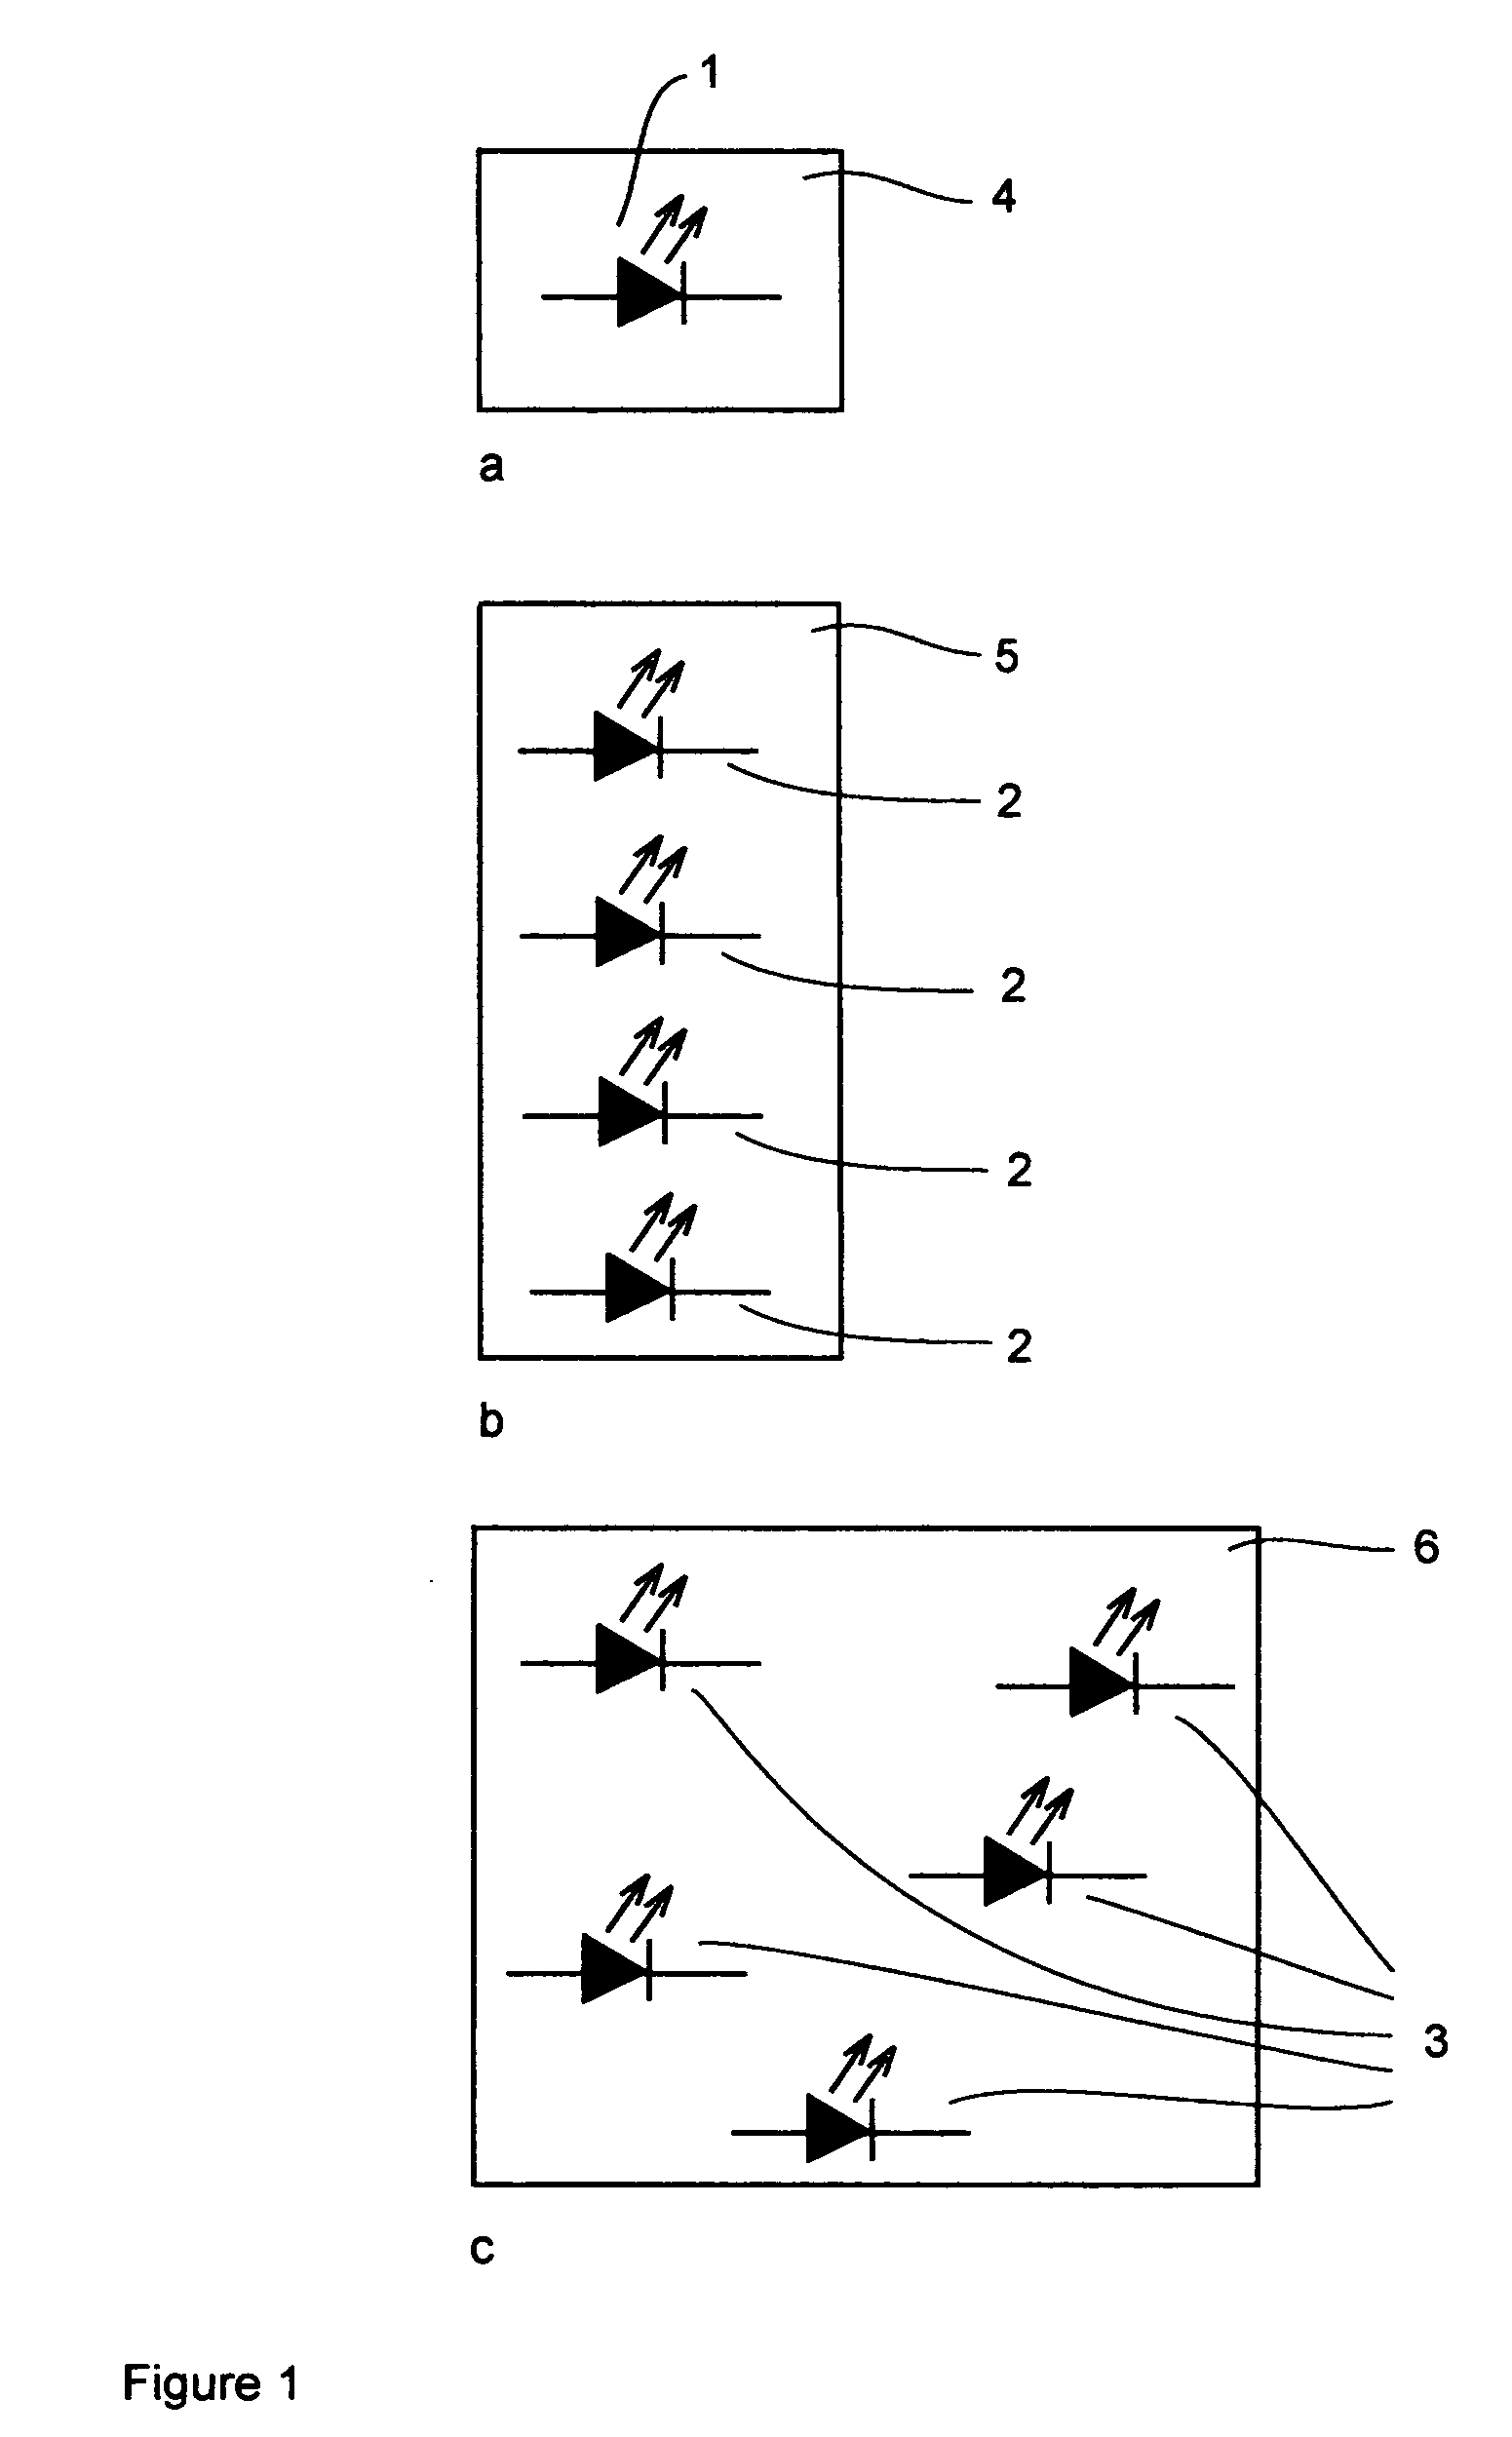 Illumination device and method for medical procedures